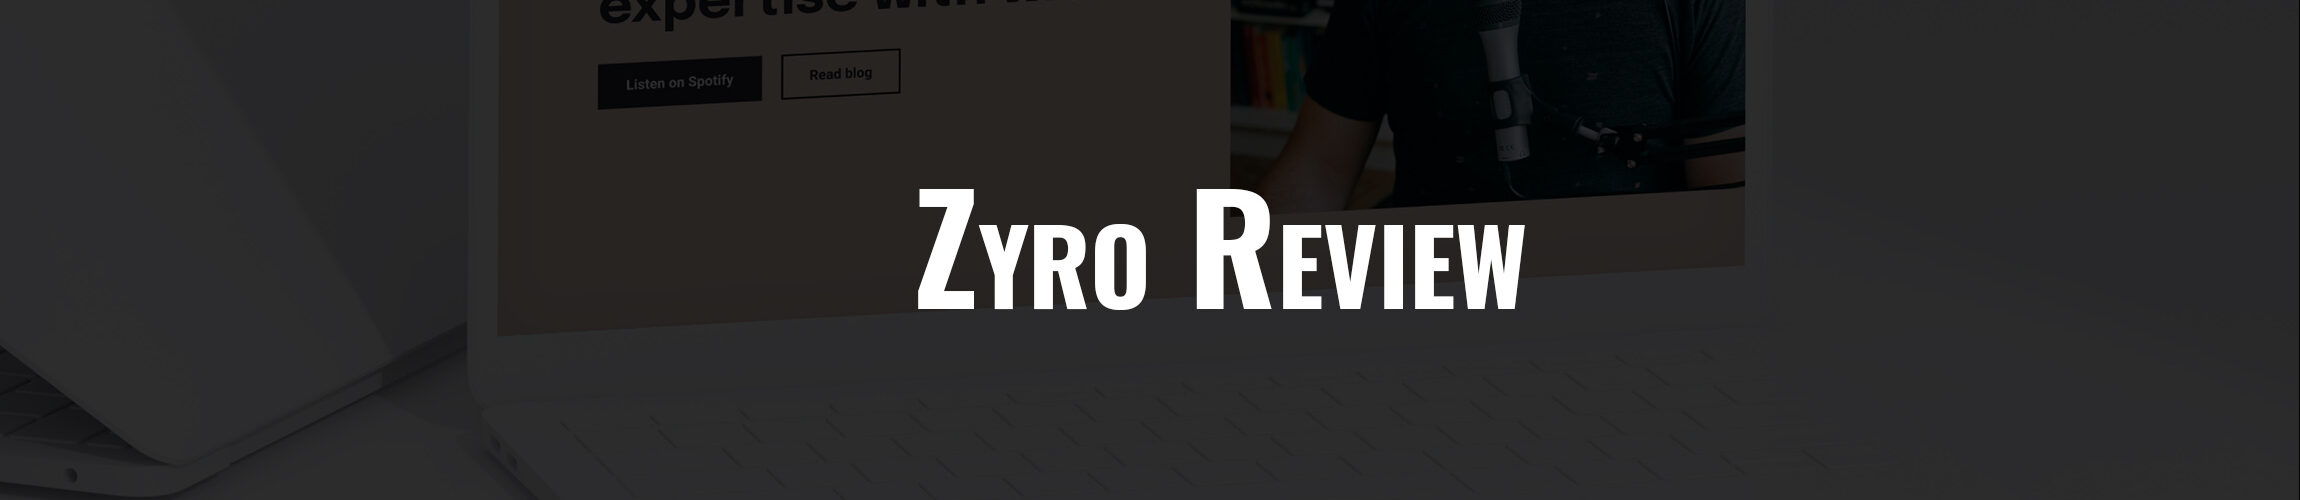 zyro review